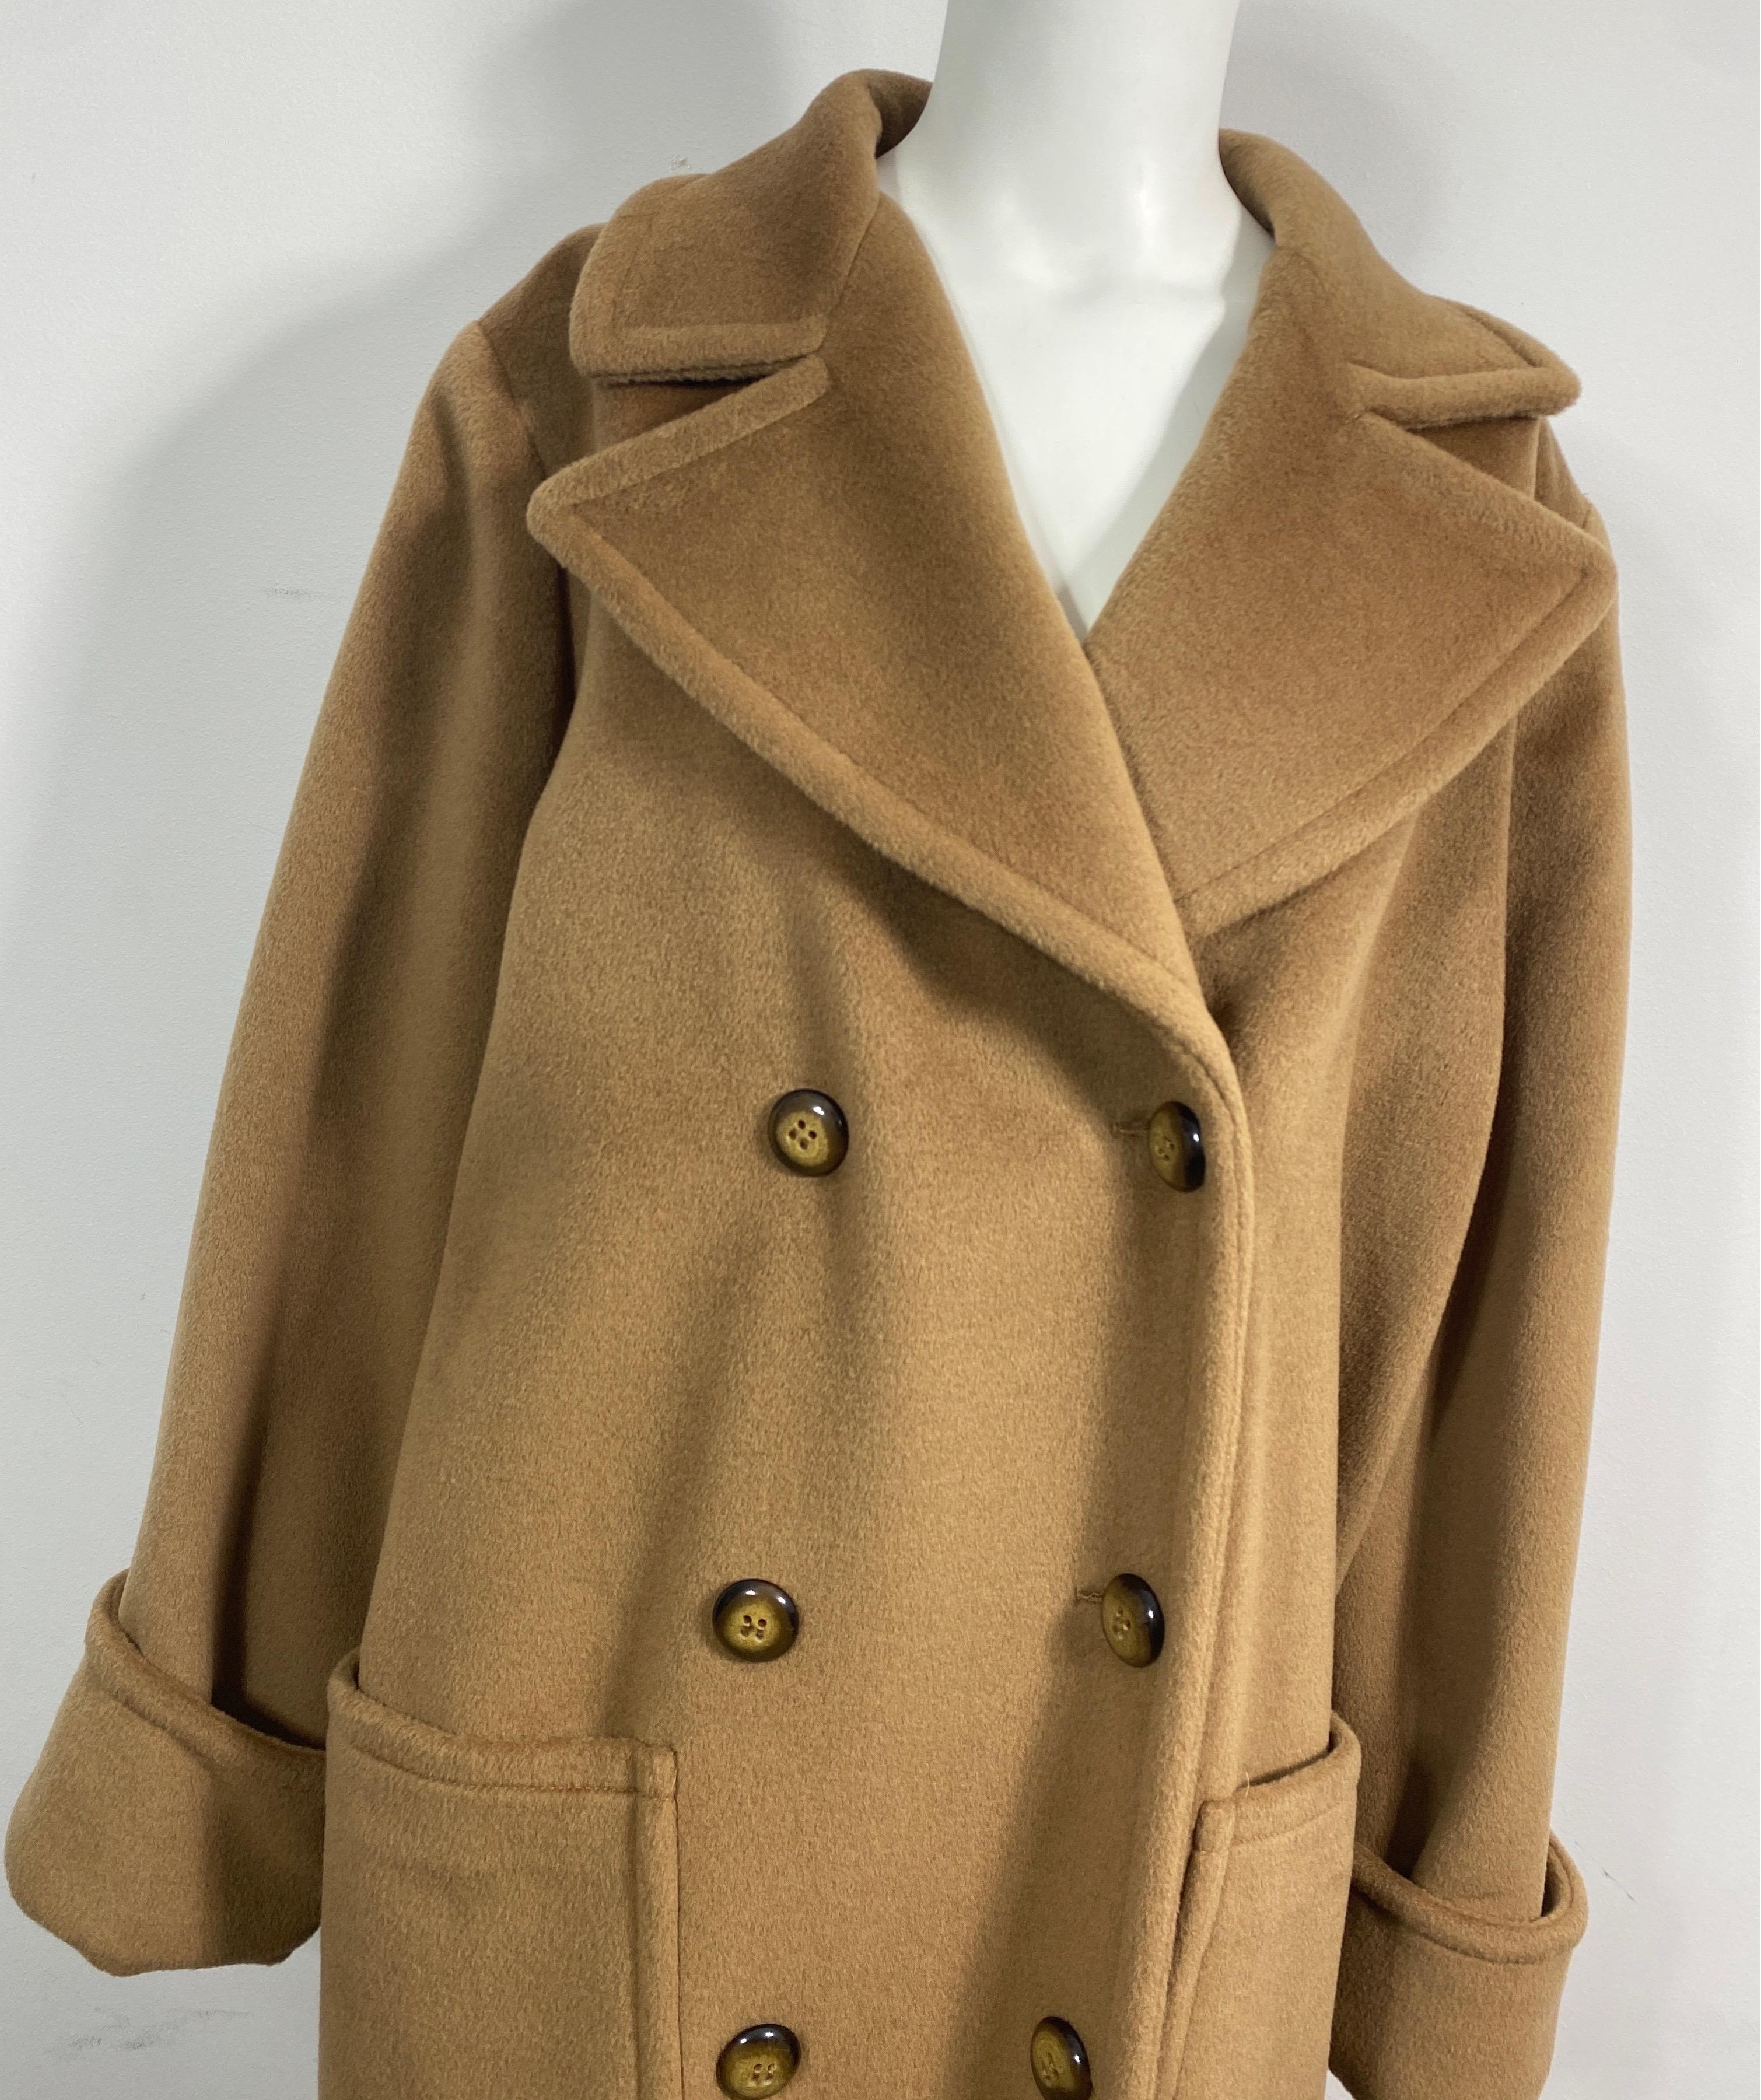 Valentino Boutique 1990’s Double Breasted Tan Cashmere Oversized Coat - Size 10 In Excellent Condition For Sale In West Palm Beach, FL